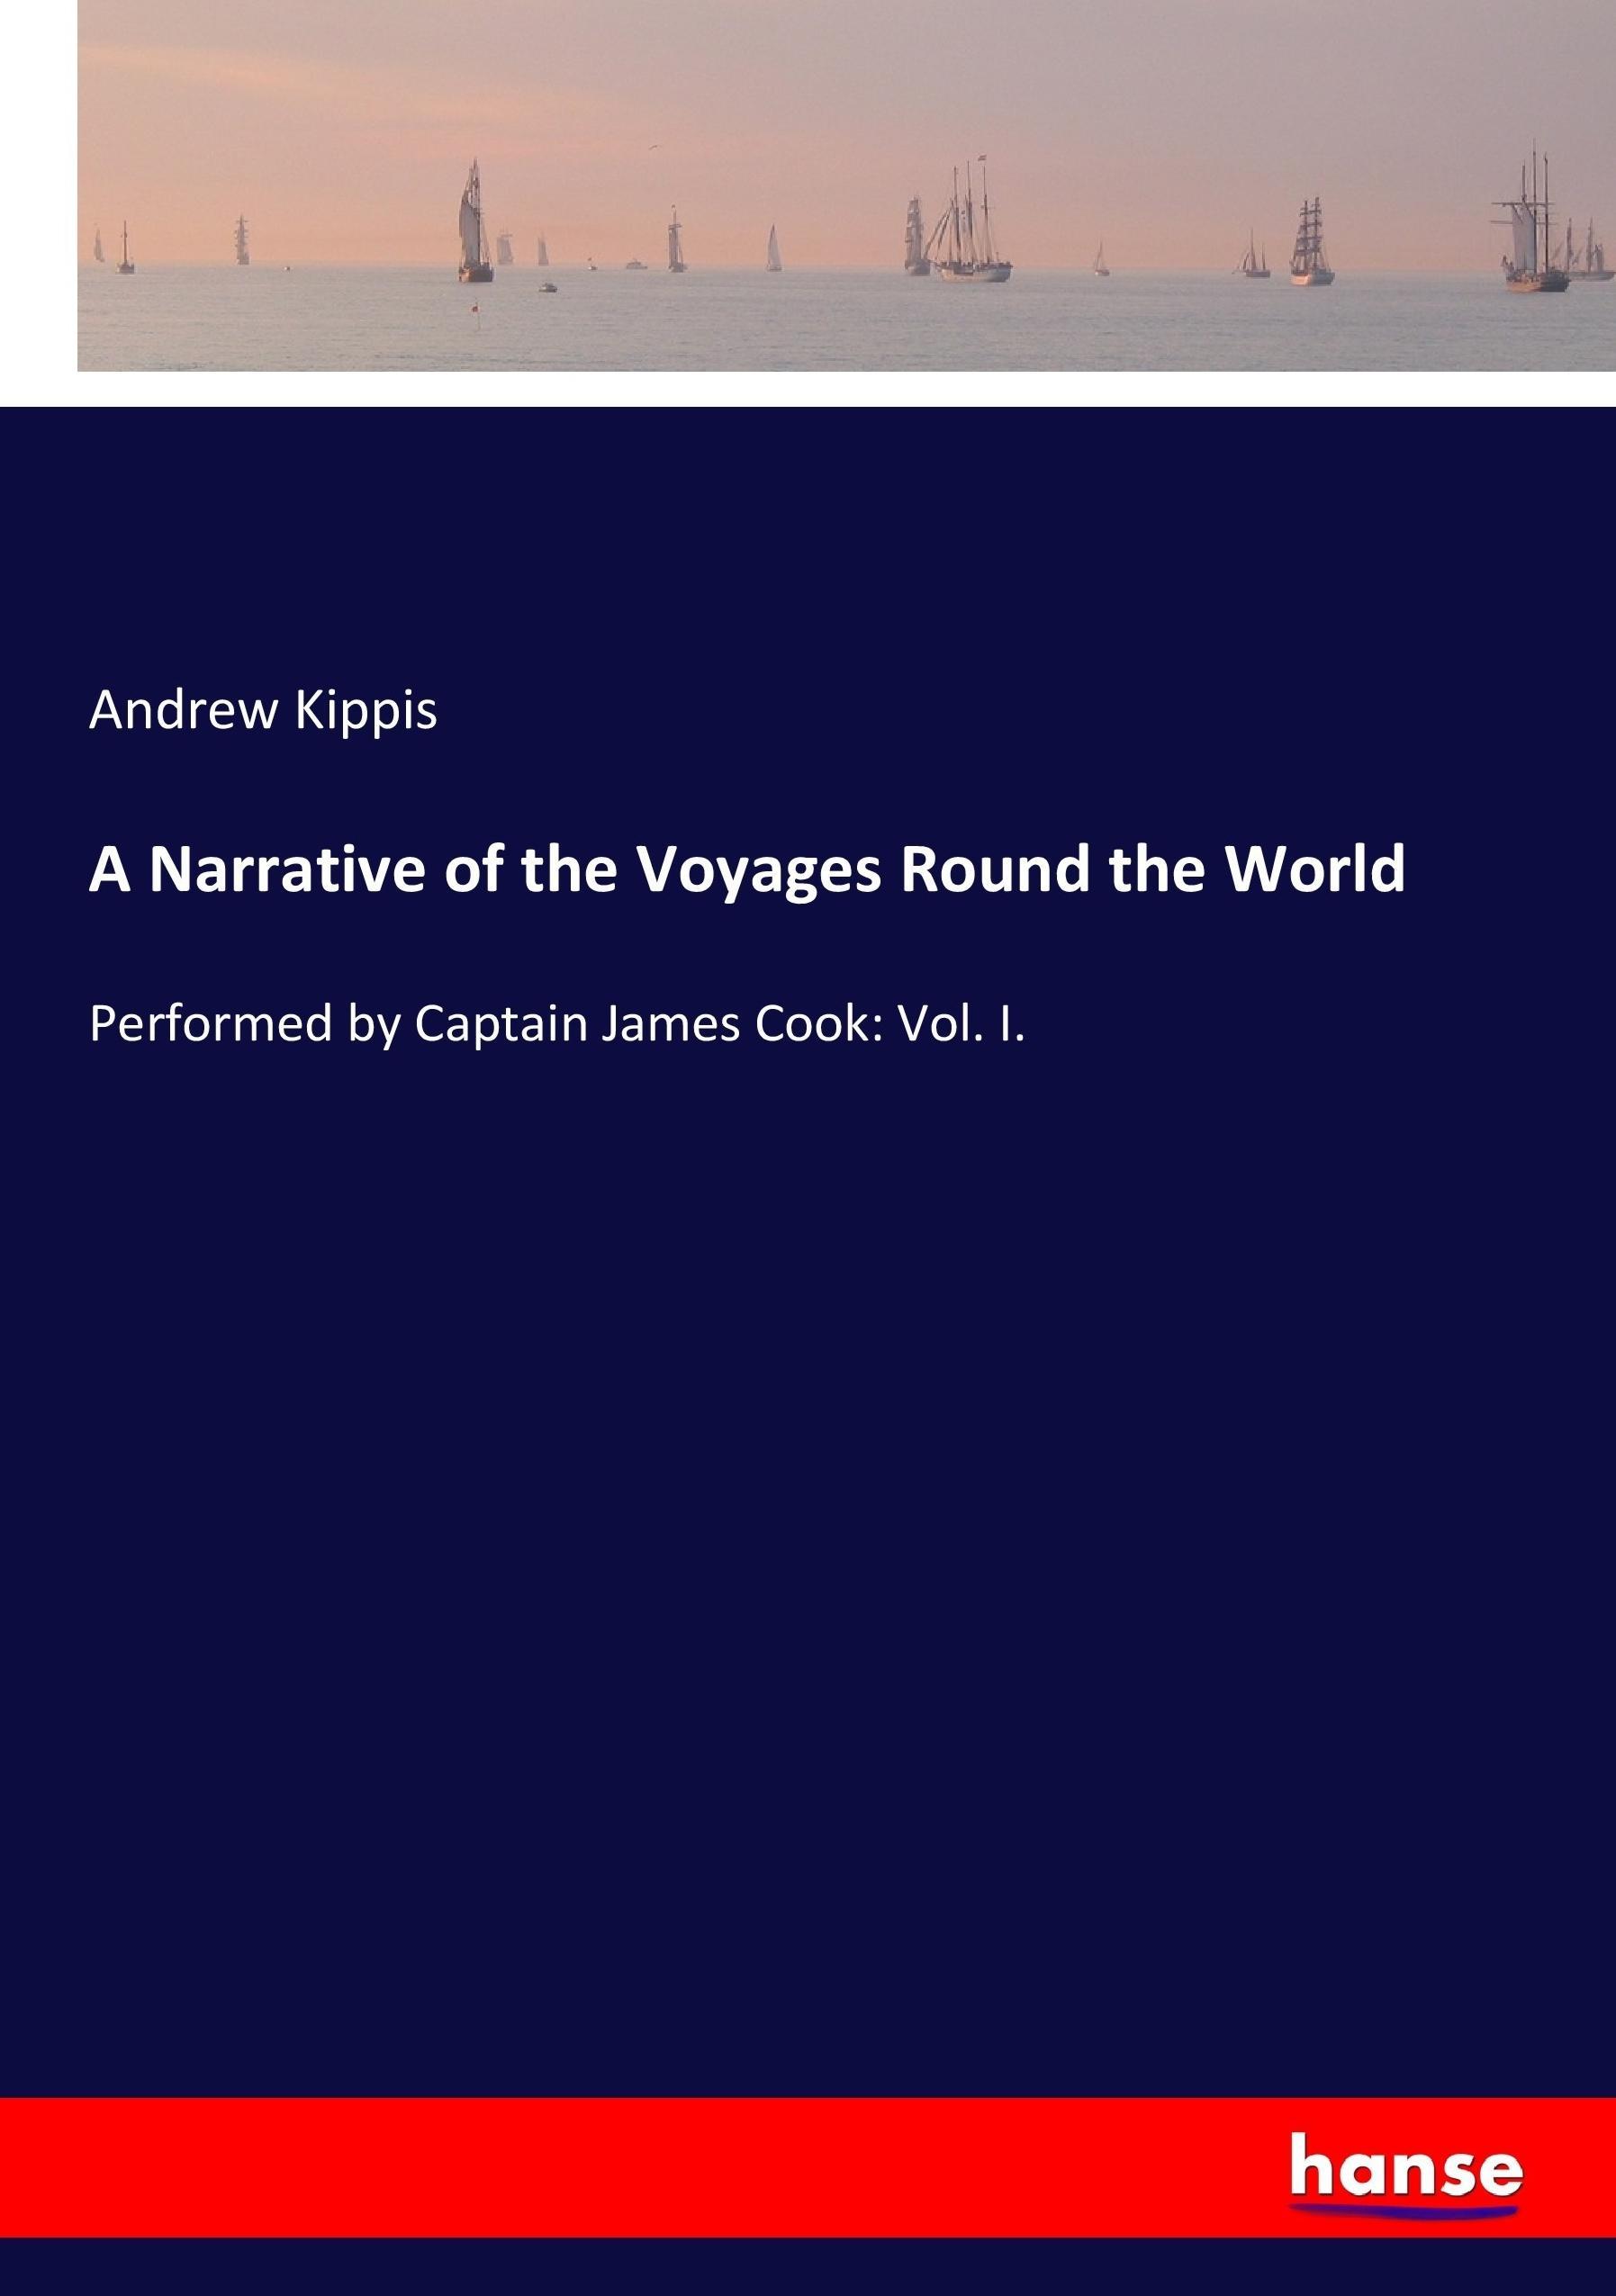 A Narrative of the Voyages Round the World | Performed by Captain James Cook: Vol. I. | Andrew Kippis | Taschenbuch | Paperback | 420 S. | Englisch | 2017 | hansebooks | EAN 9783744788267 - Kippis, Andrew